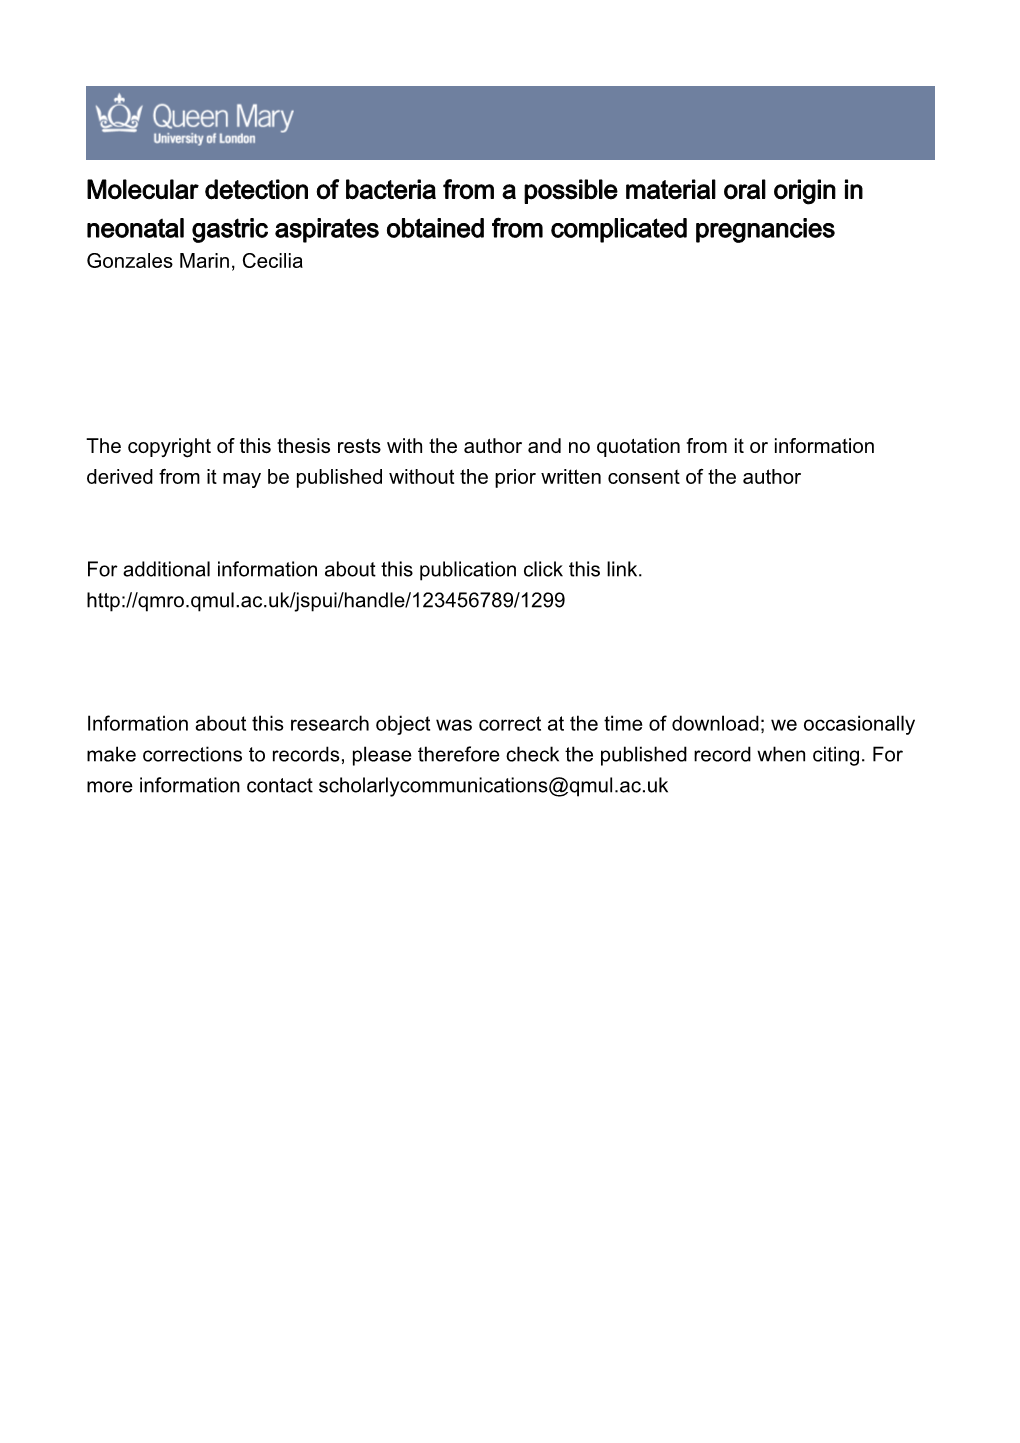 Molecular Detection of Bacteria from a Possible Material Oral Origin in Neonatal Gastric Aspirates Obtained from Complicated Pregnancies Gonzales Marin, Cecilia